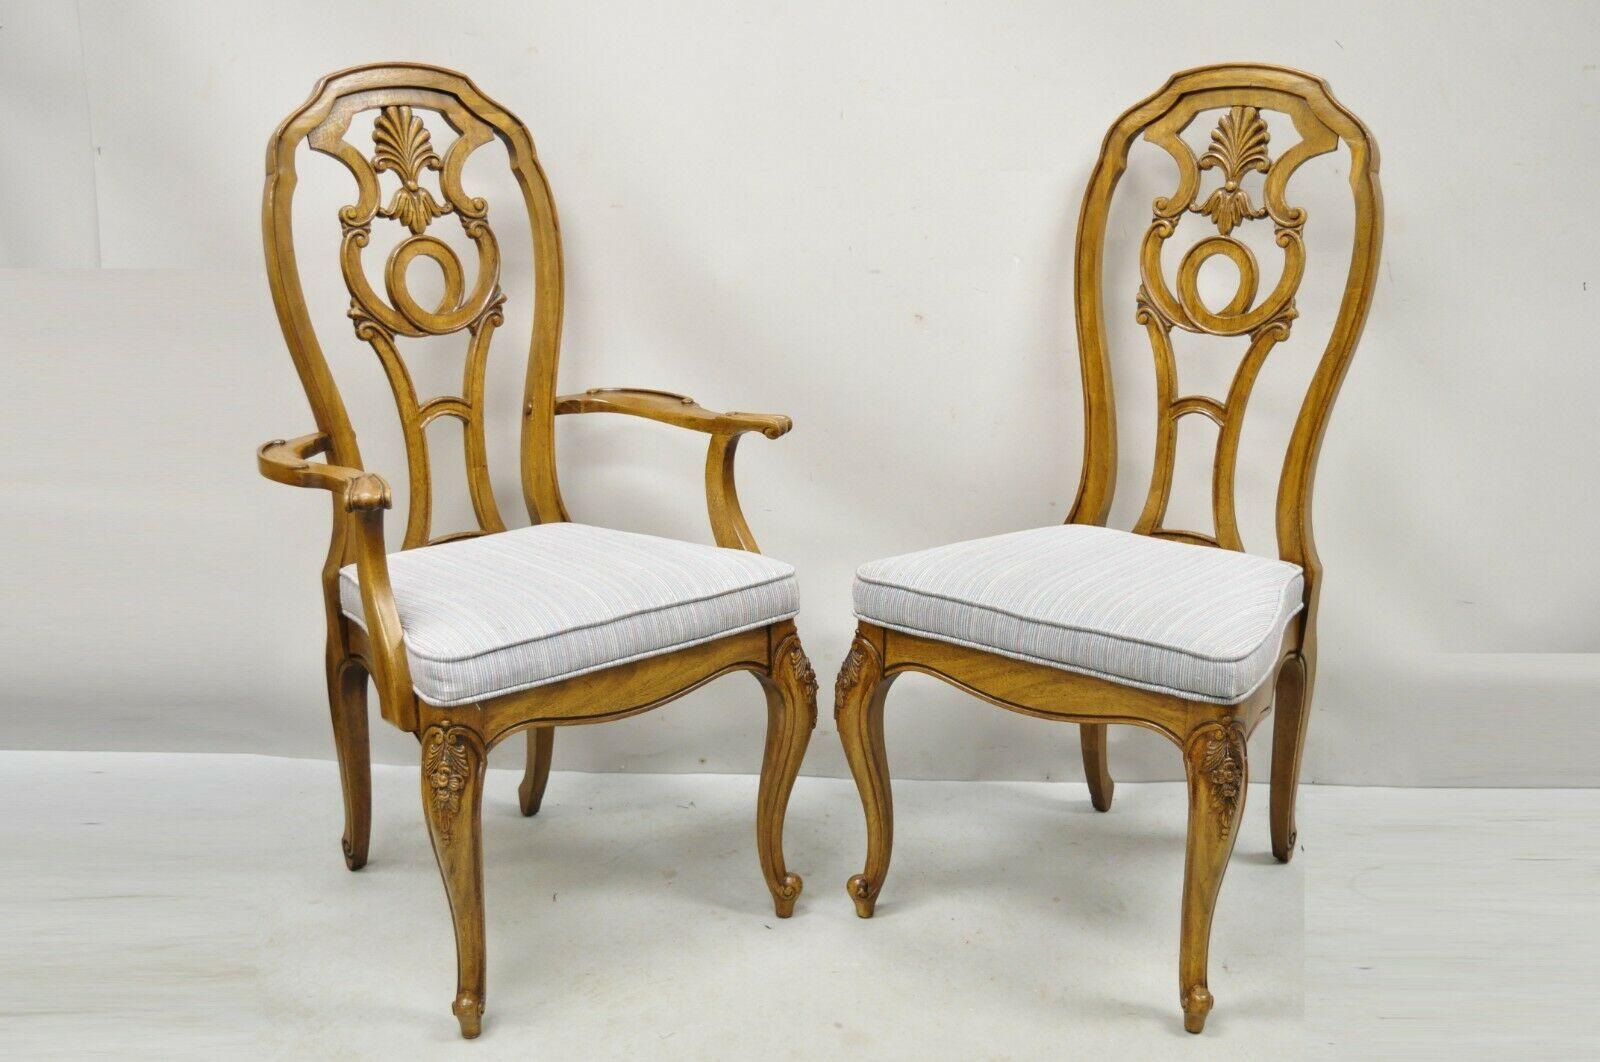 Vintage Italian Baroque style carved wood dining chairs - Set of 6. Item features (2) arm chairs, (4) side chairs, beautiful wood grain, nicely carved details, cabriole legs, very nice vintage set, great style and form. Circa Mid to Late 20th